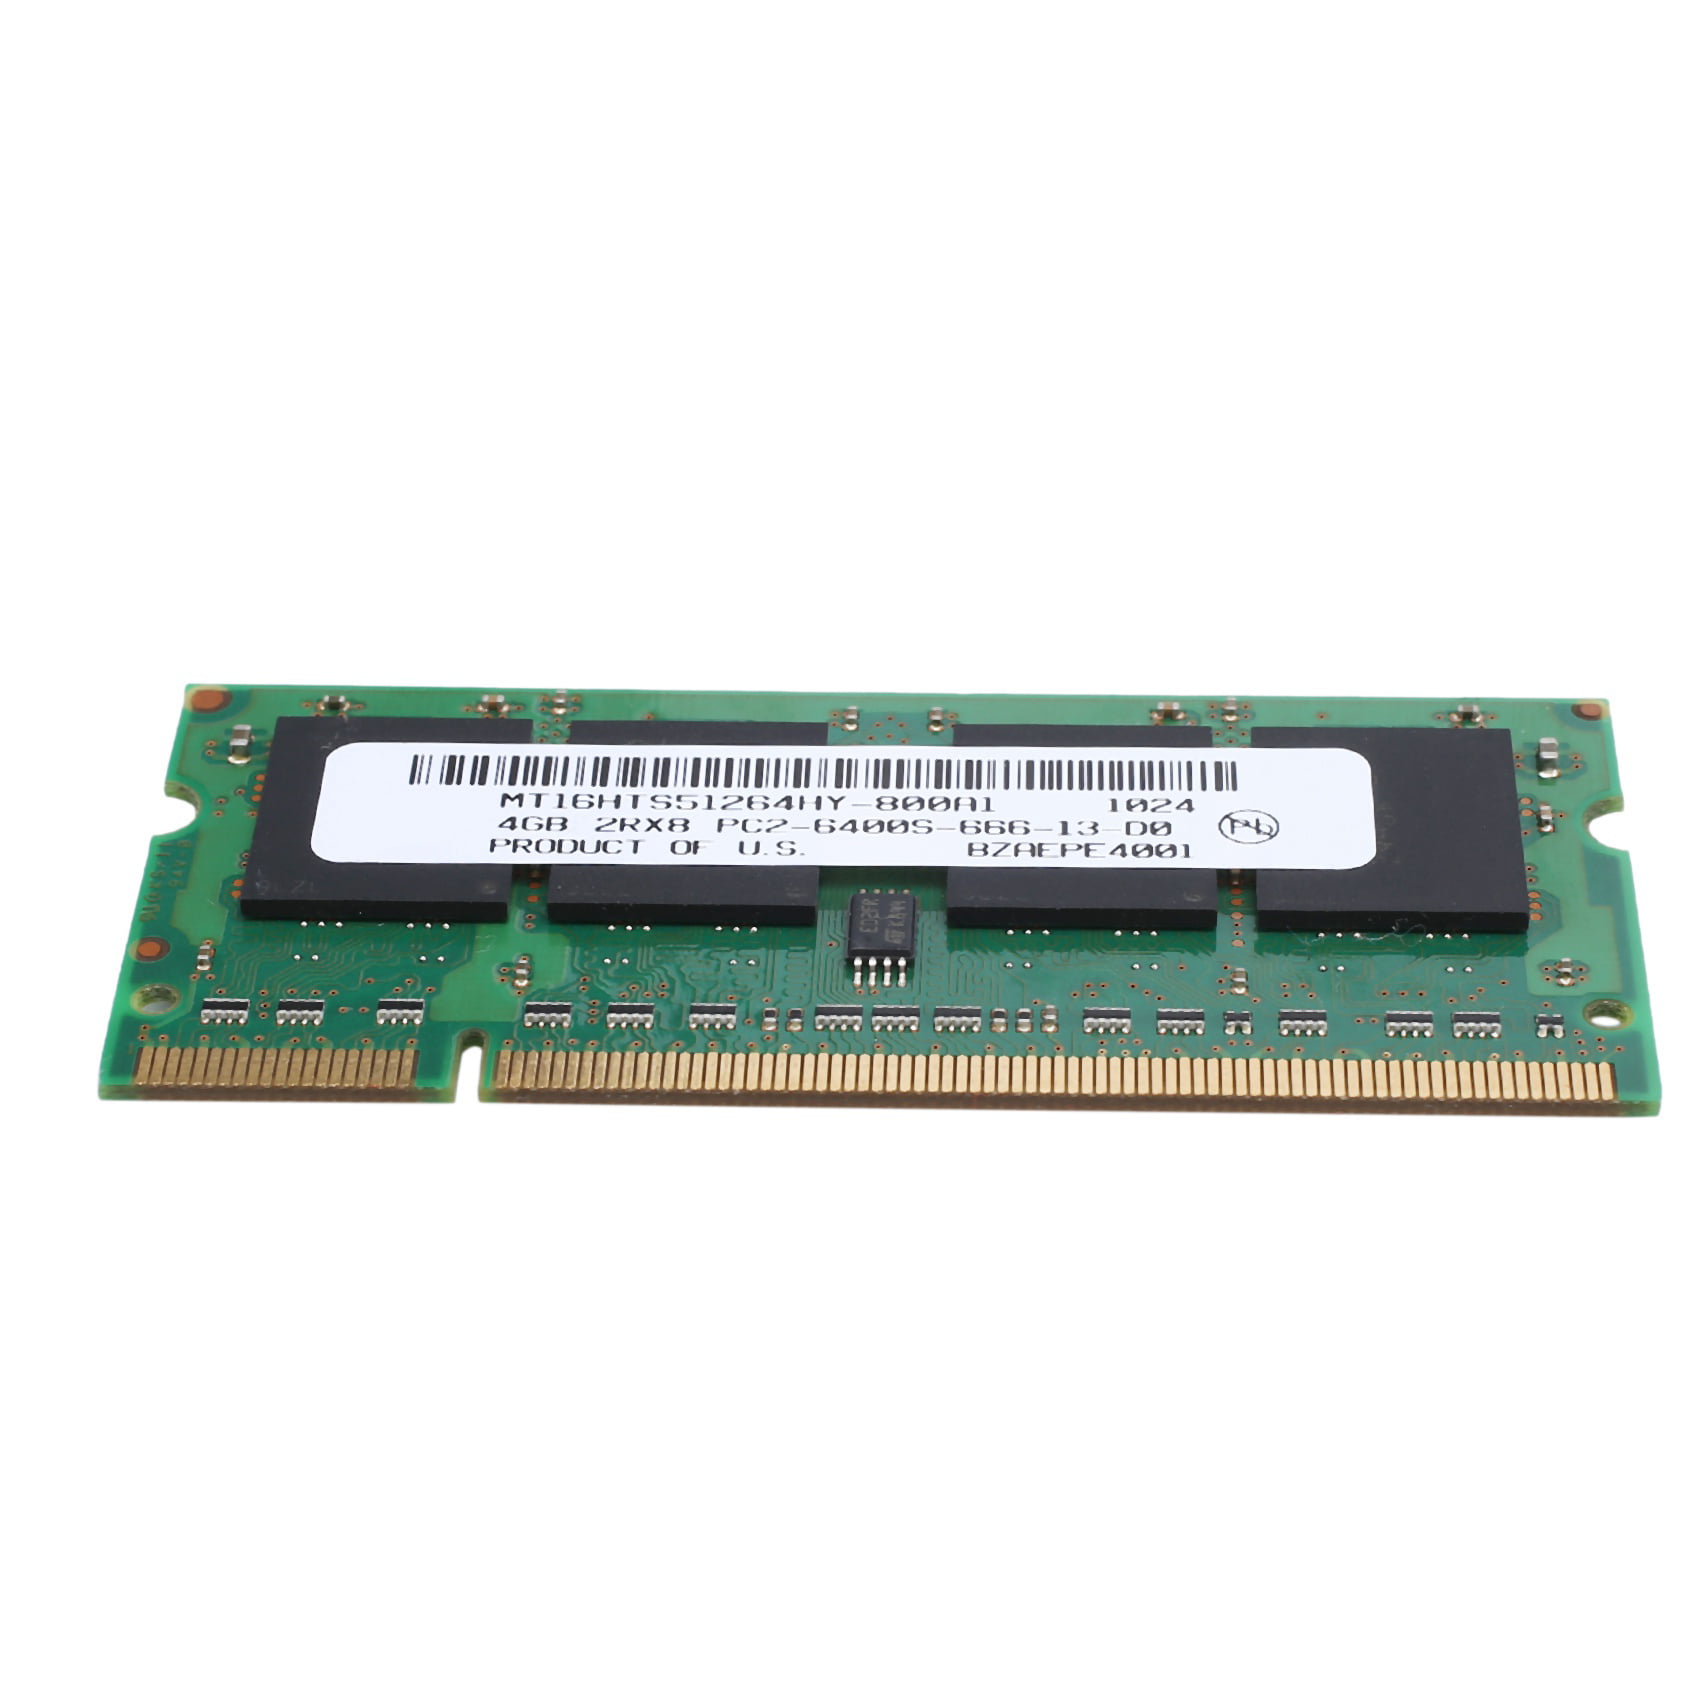 4X（4GB DDR2 Laptop Ram 800Mhz PC2 6400 SODIMM 2RX8 200 Pins for